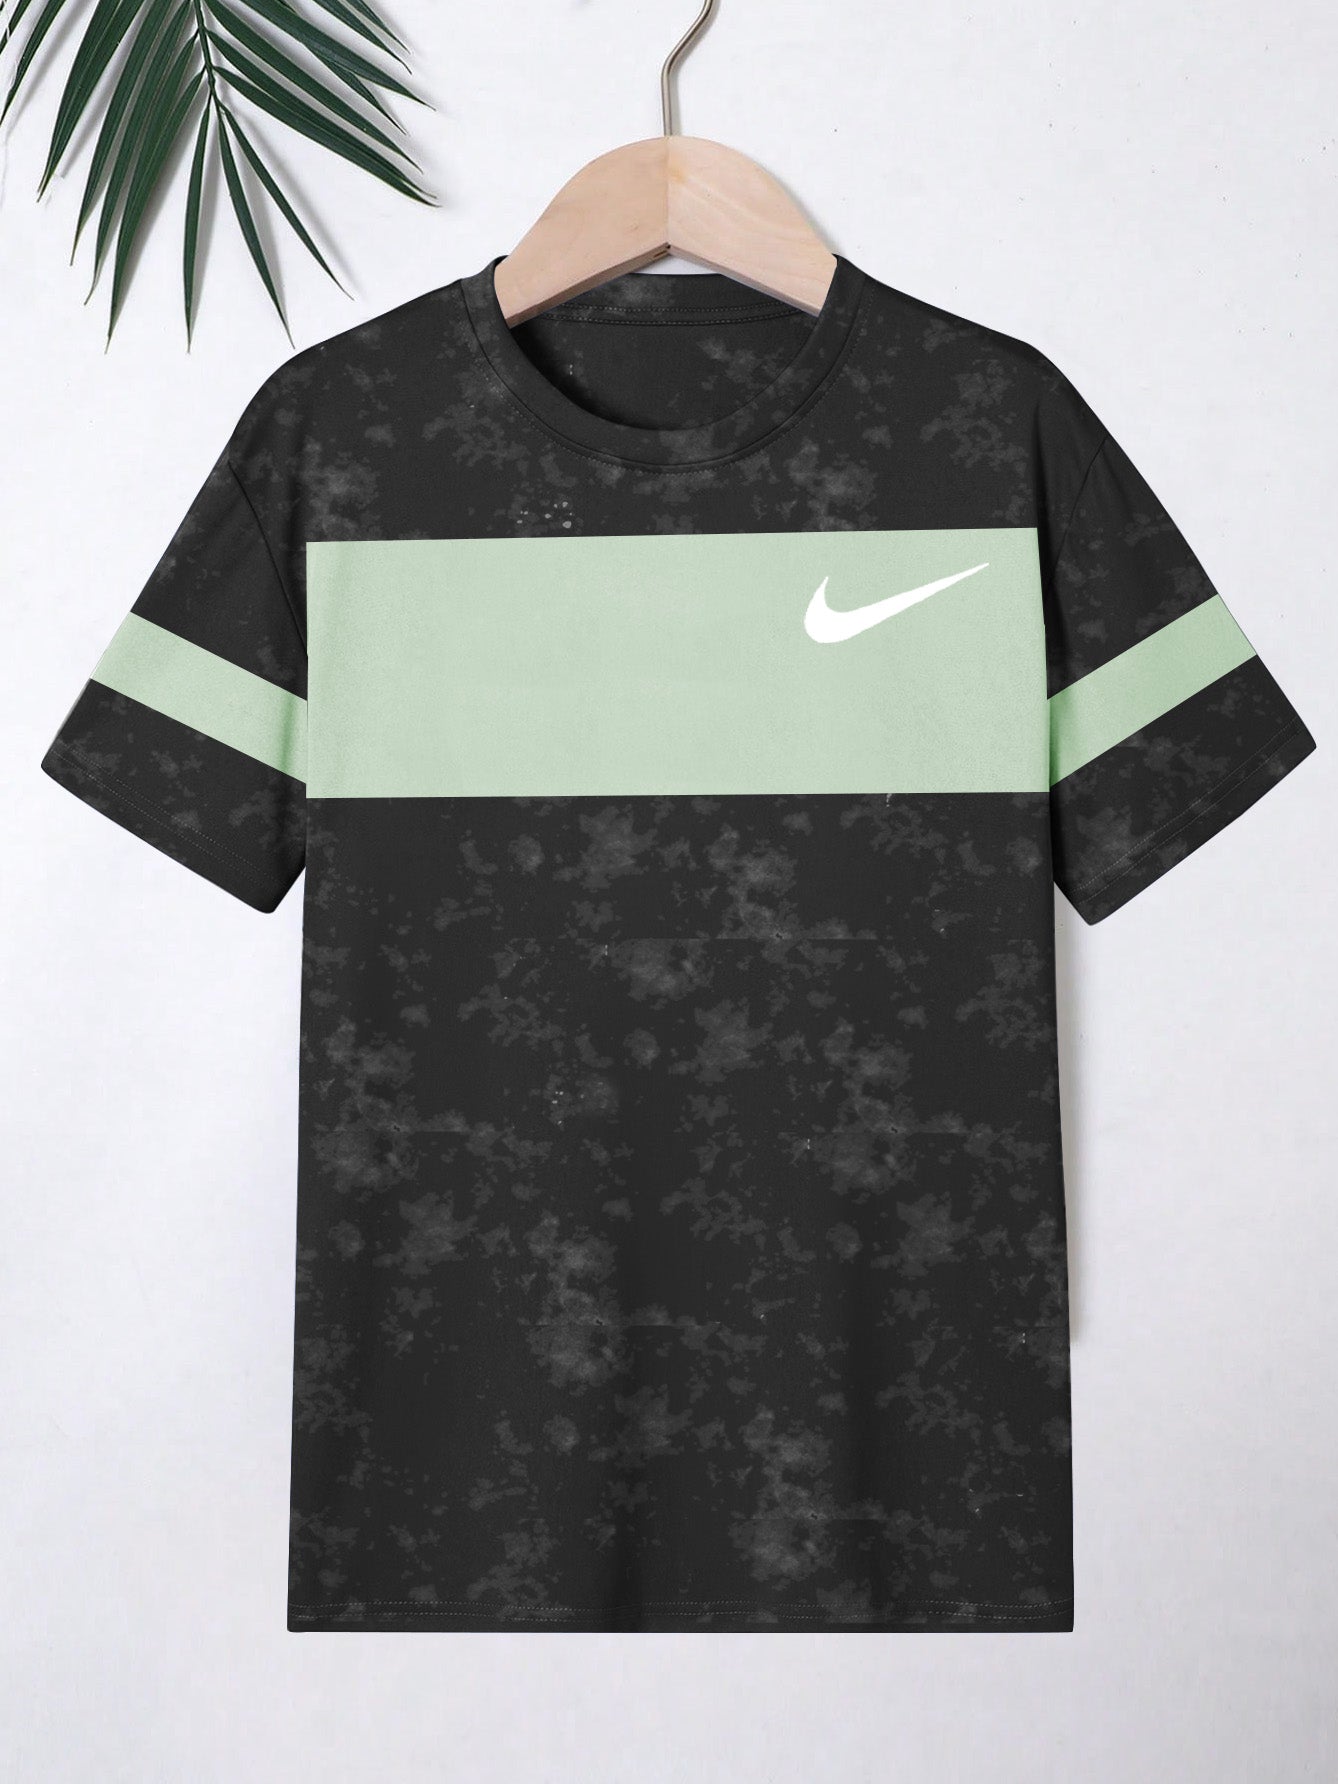 NK Crew Neck Single Jersey Tee Shirt For Men-Black Faded with Light Green Panel-SP2250